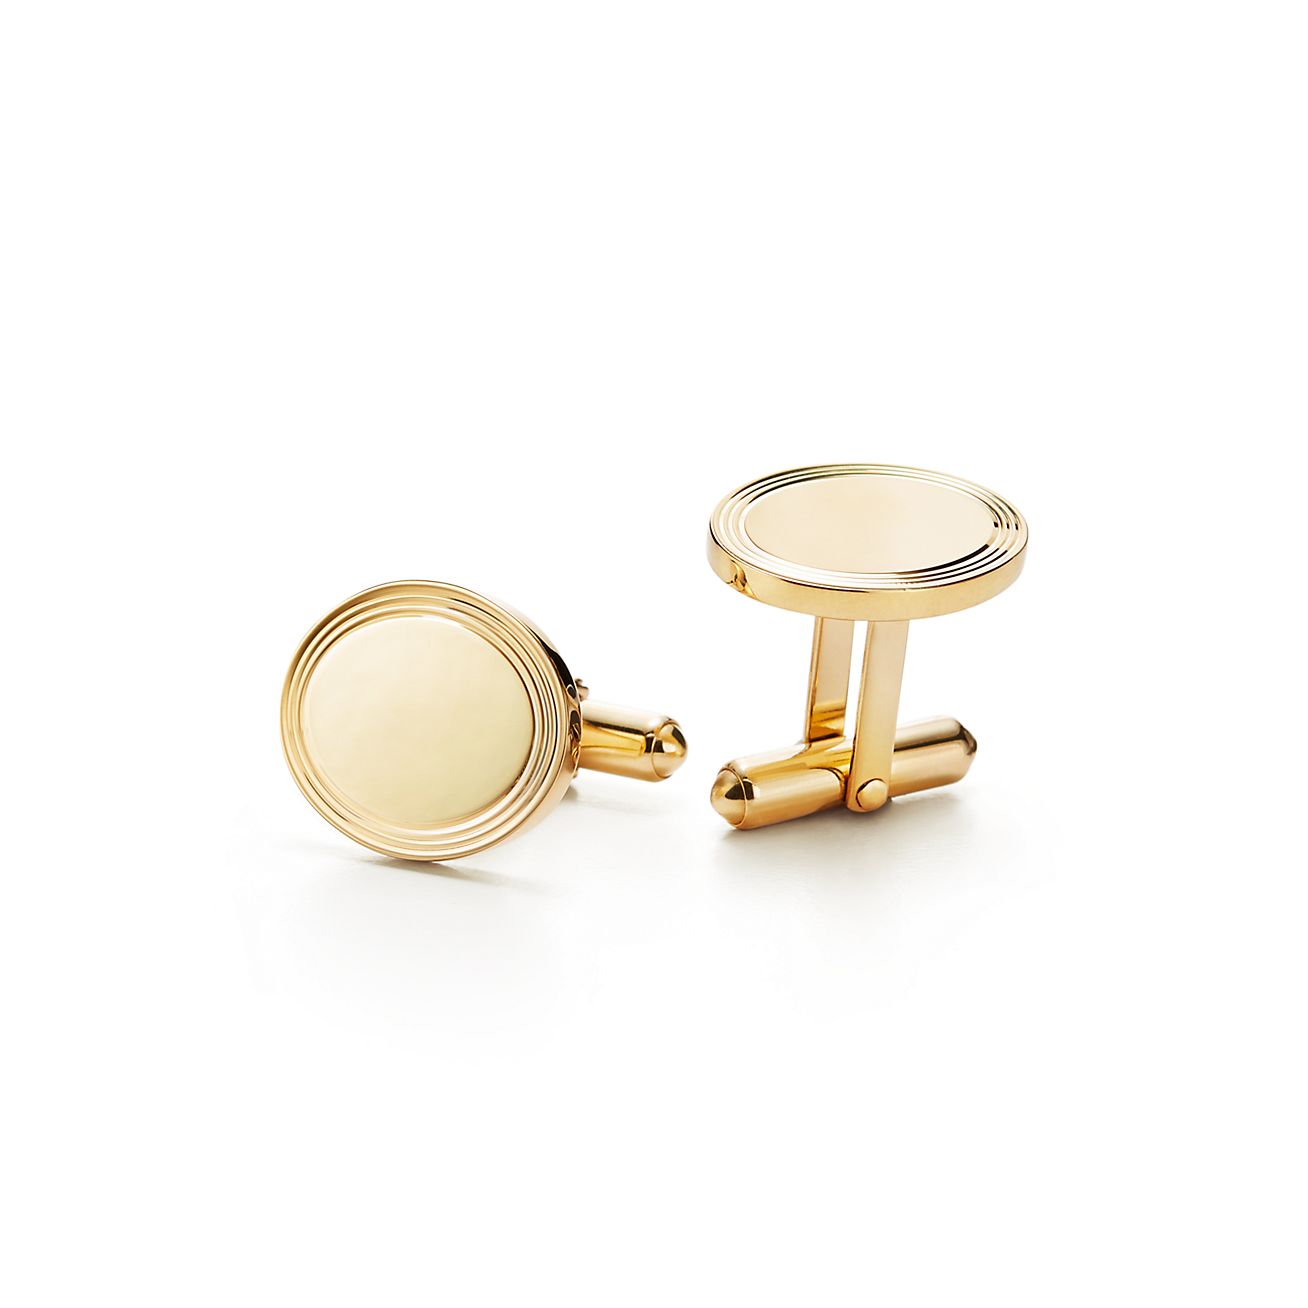 Engine-turned oval cuff links in 18k 